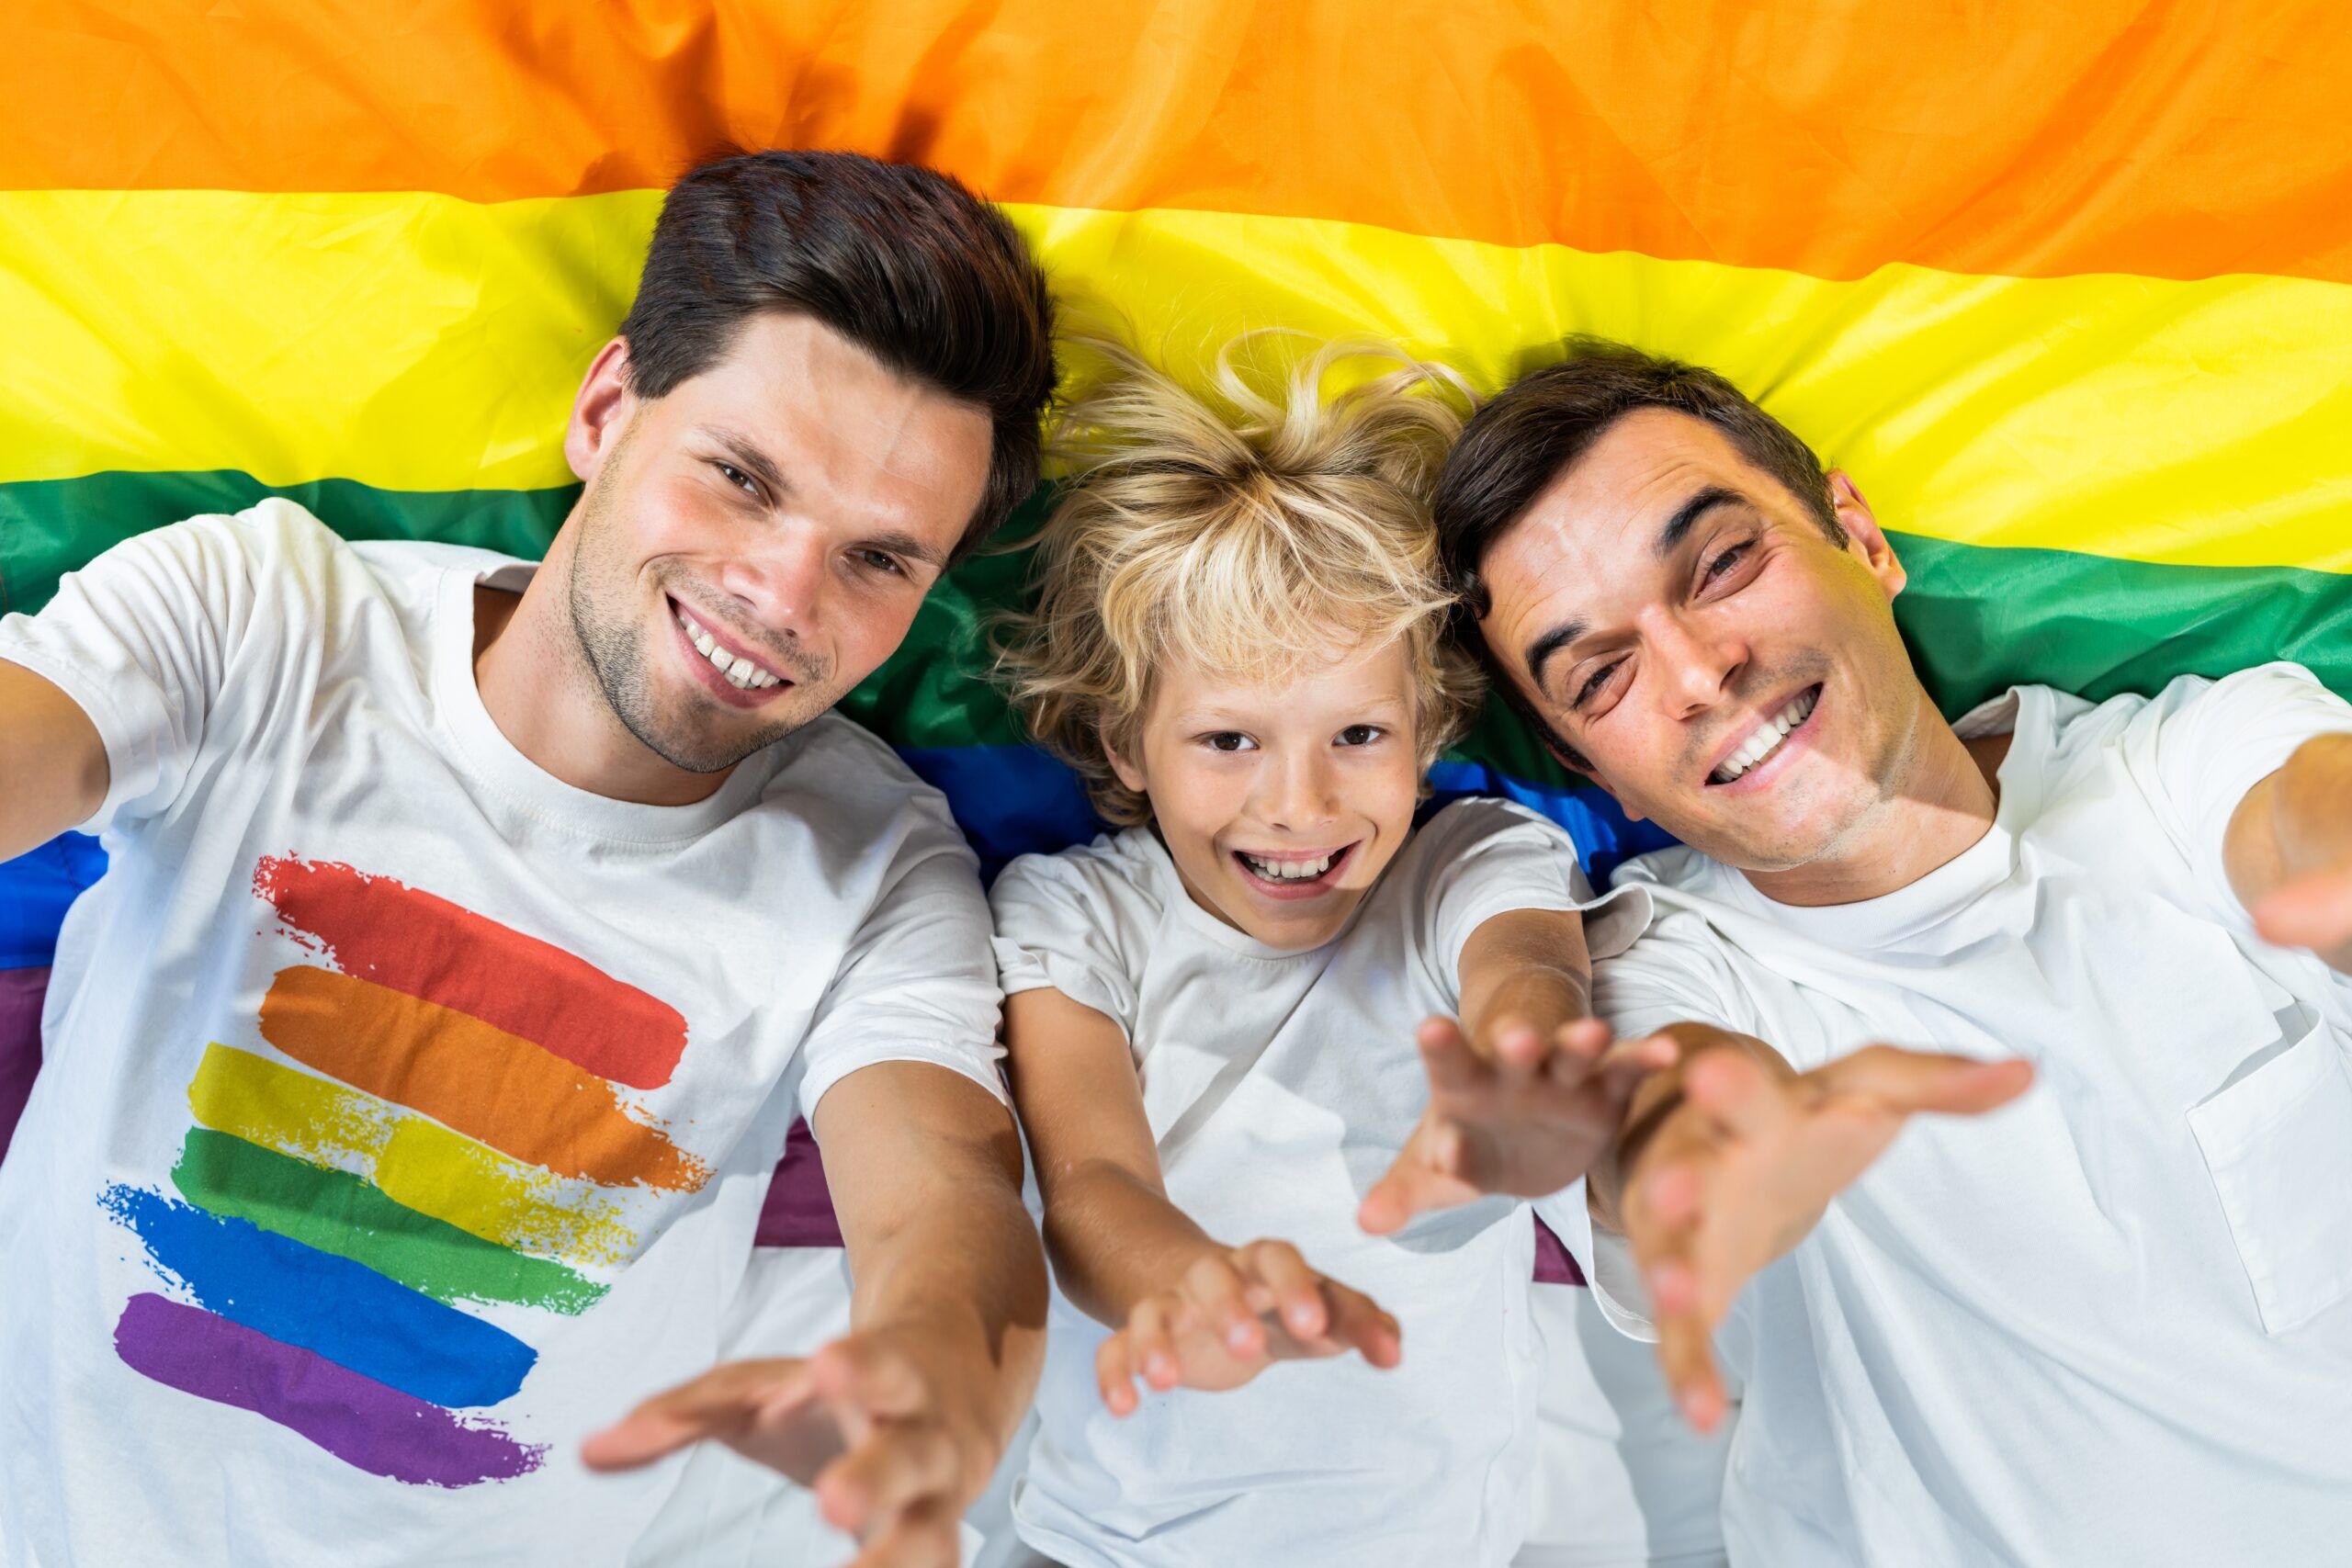 An LGBTQ+ Family (two dads and a kid in the middle) smiling joyfully, laying on top of a rainbow flag and looking up at the camera